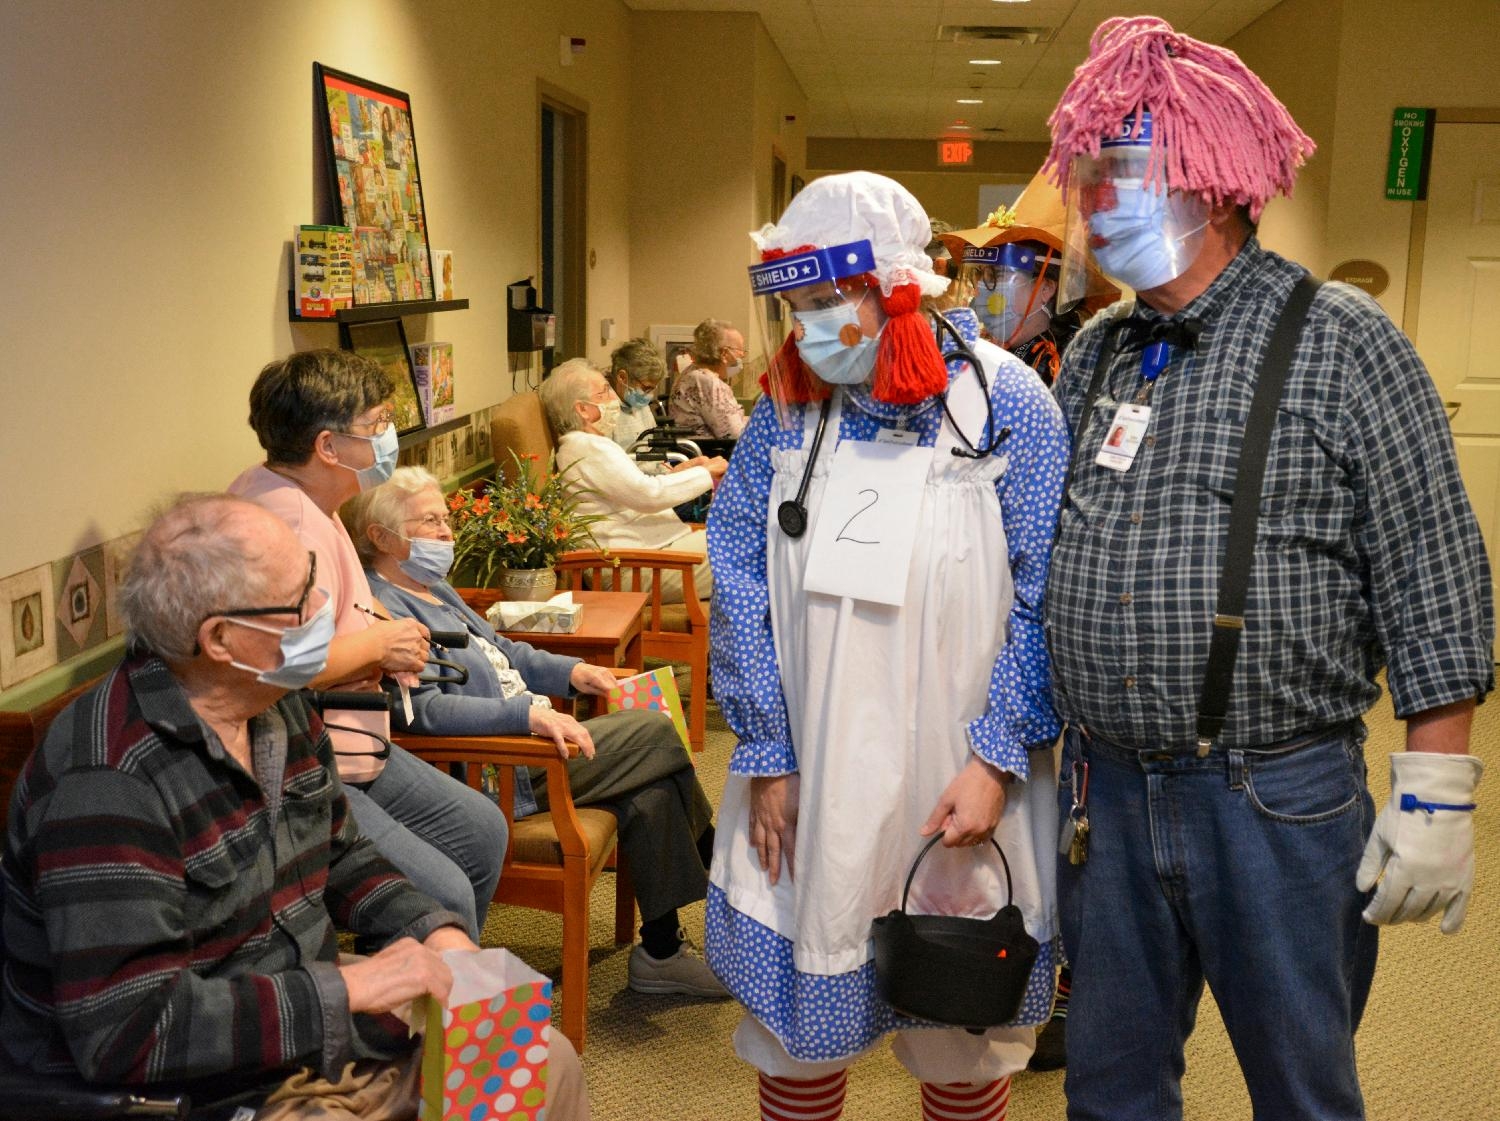 Team members dress-up for Halloween much to the delight of residents.